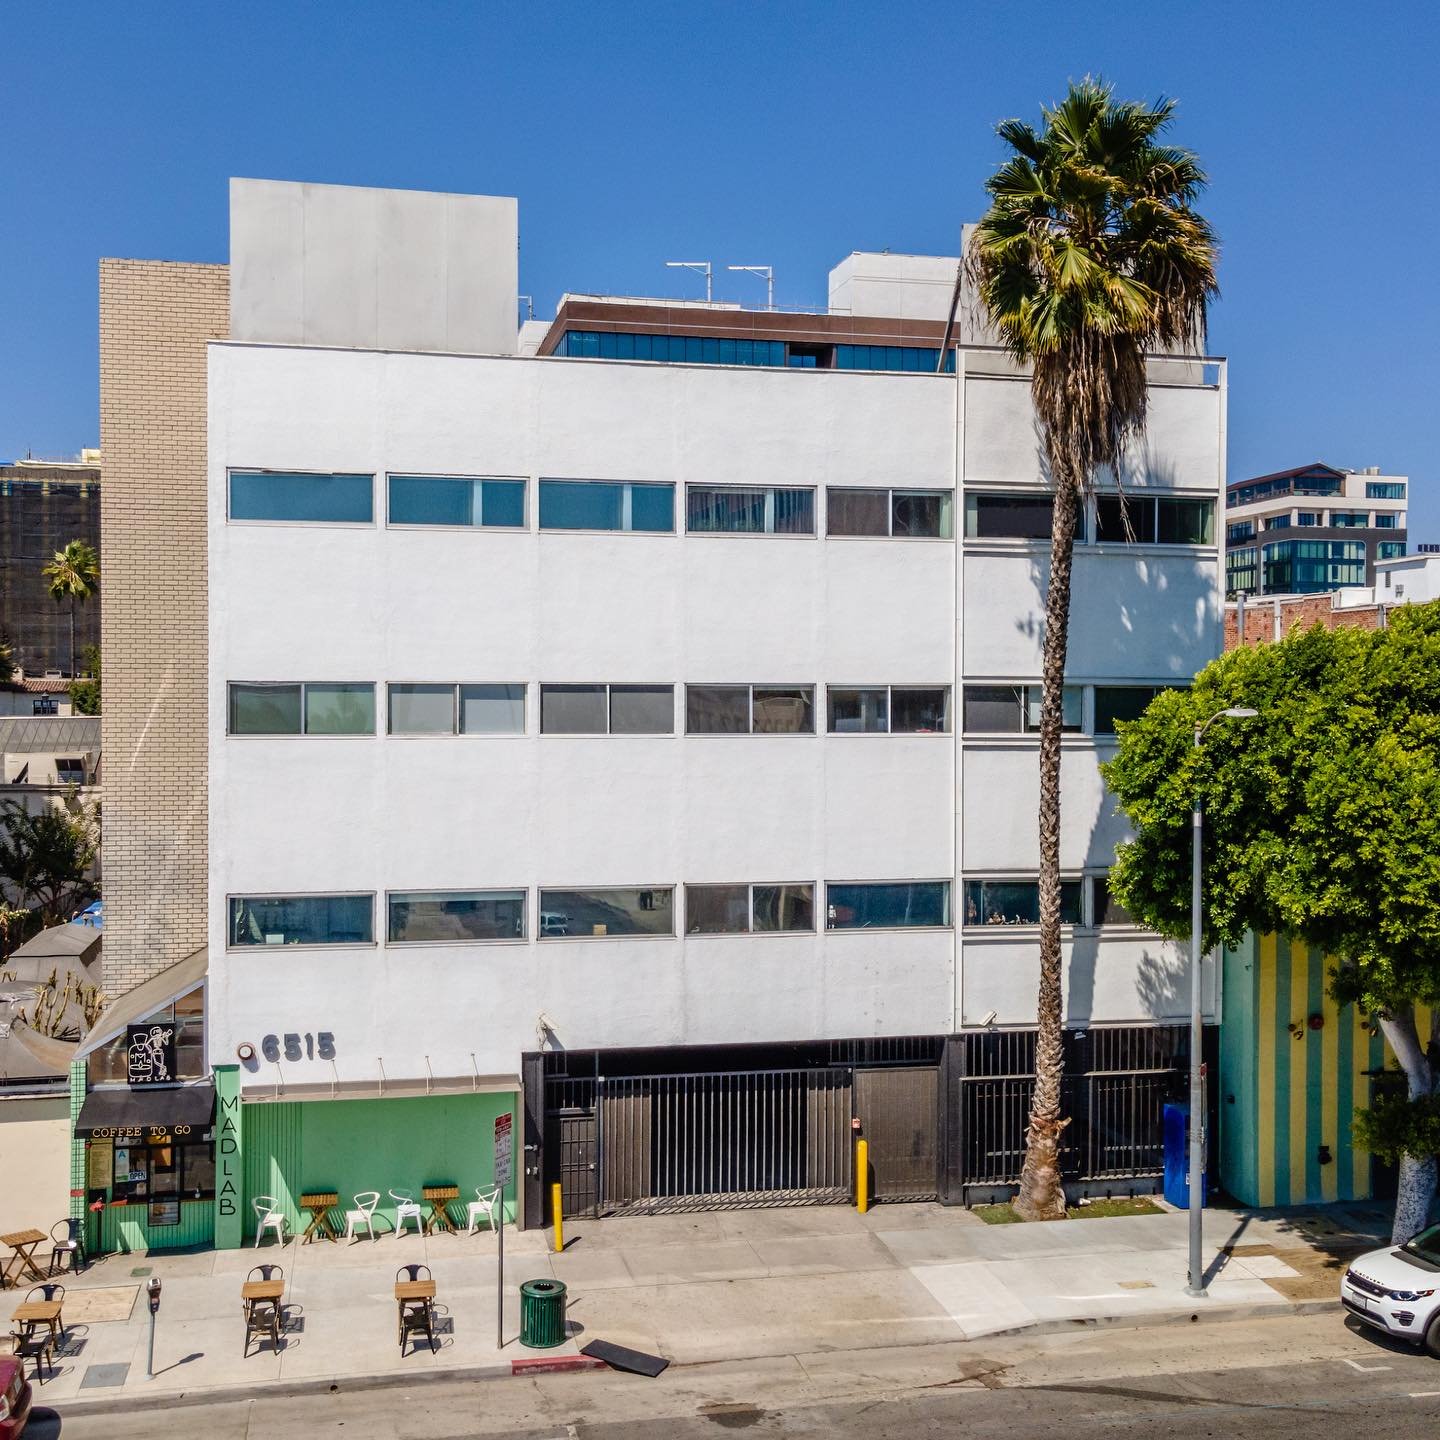 NOW FOR LEASE: Modern Creative Office suites in the Heart of Hollywood. 
6515 W Sunset Blvd

* Size: 700-2,800 SF
* Creative office suites with modern upgrades &amp; flexible layouts
* Light &amp; bright spaces with kitchenettes and operable windows
